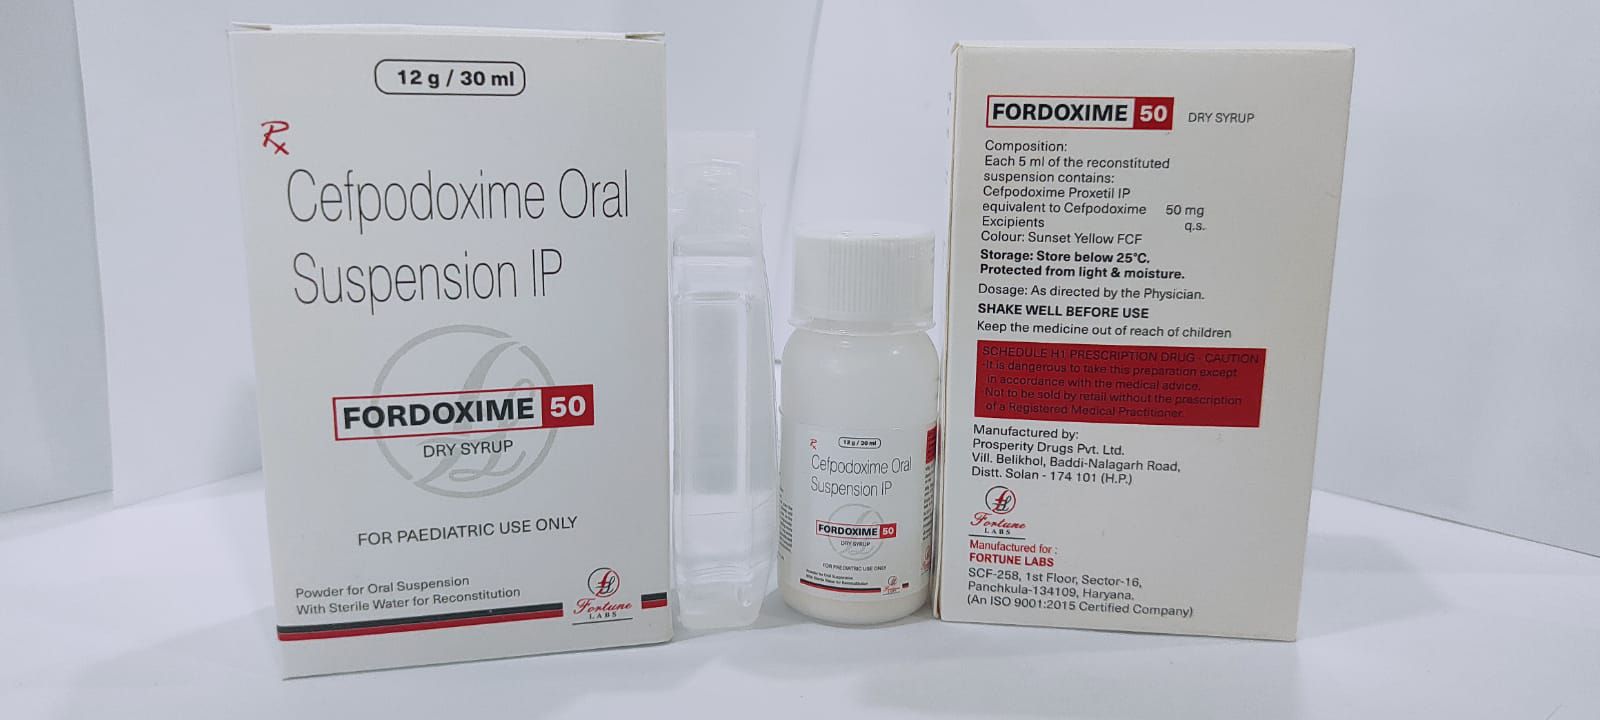 cefpodoxime proxetil 50mg (dry syrup)
with wfi